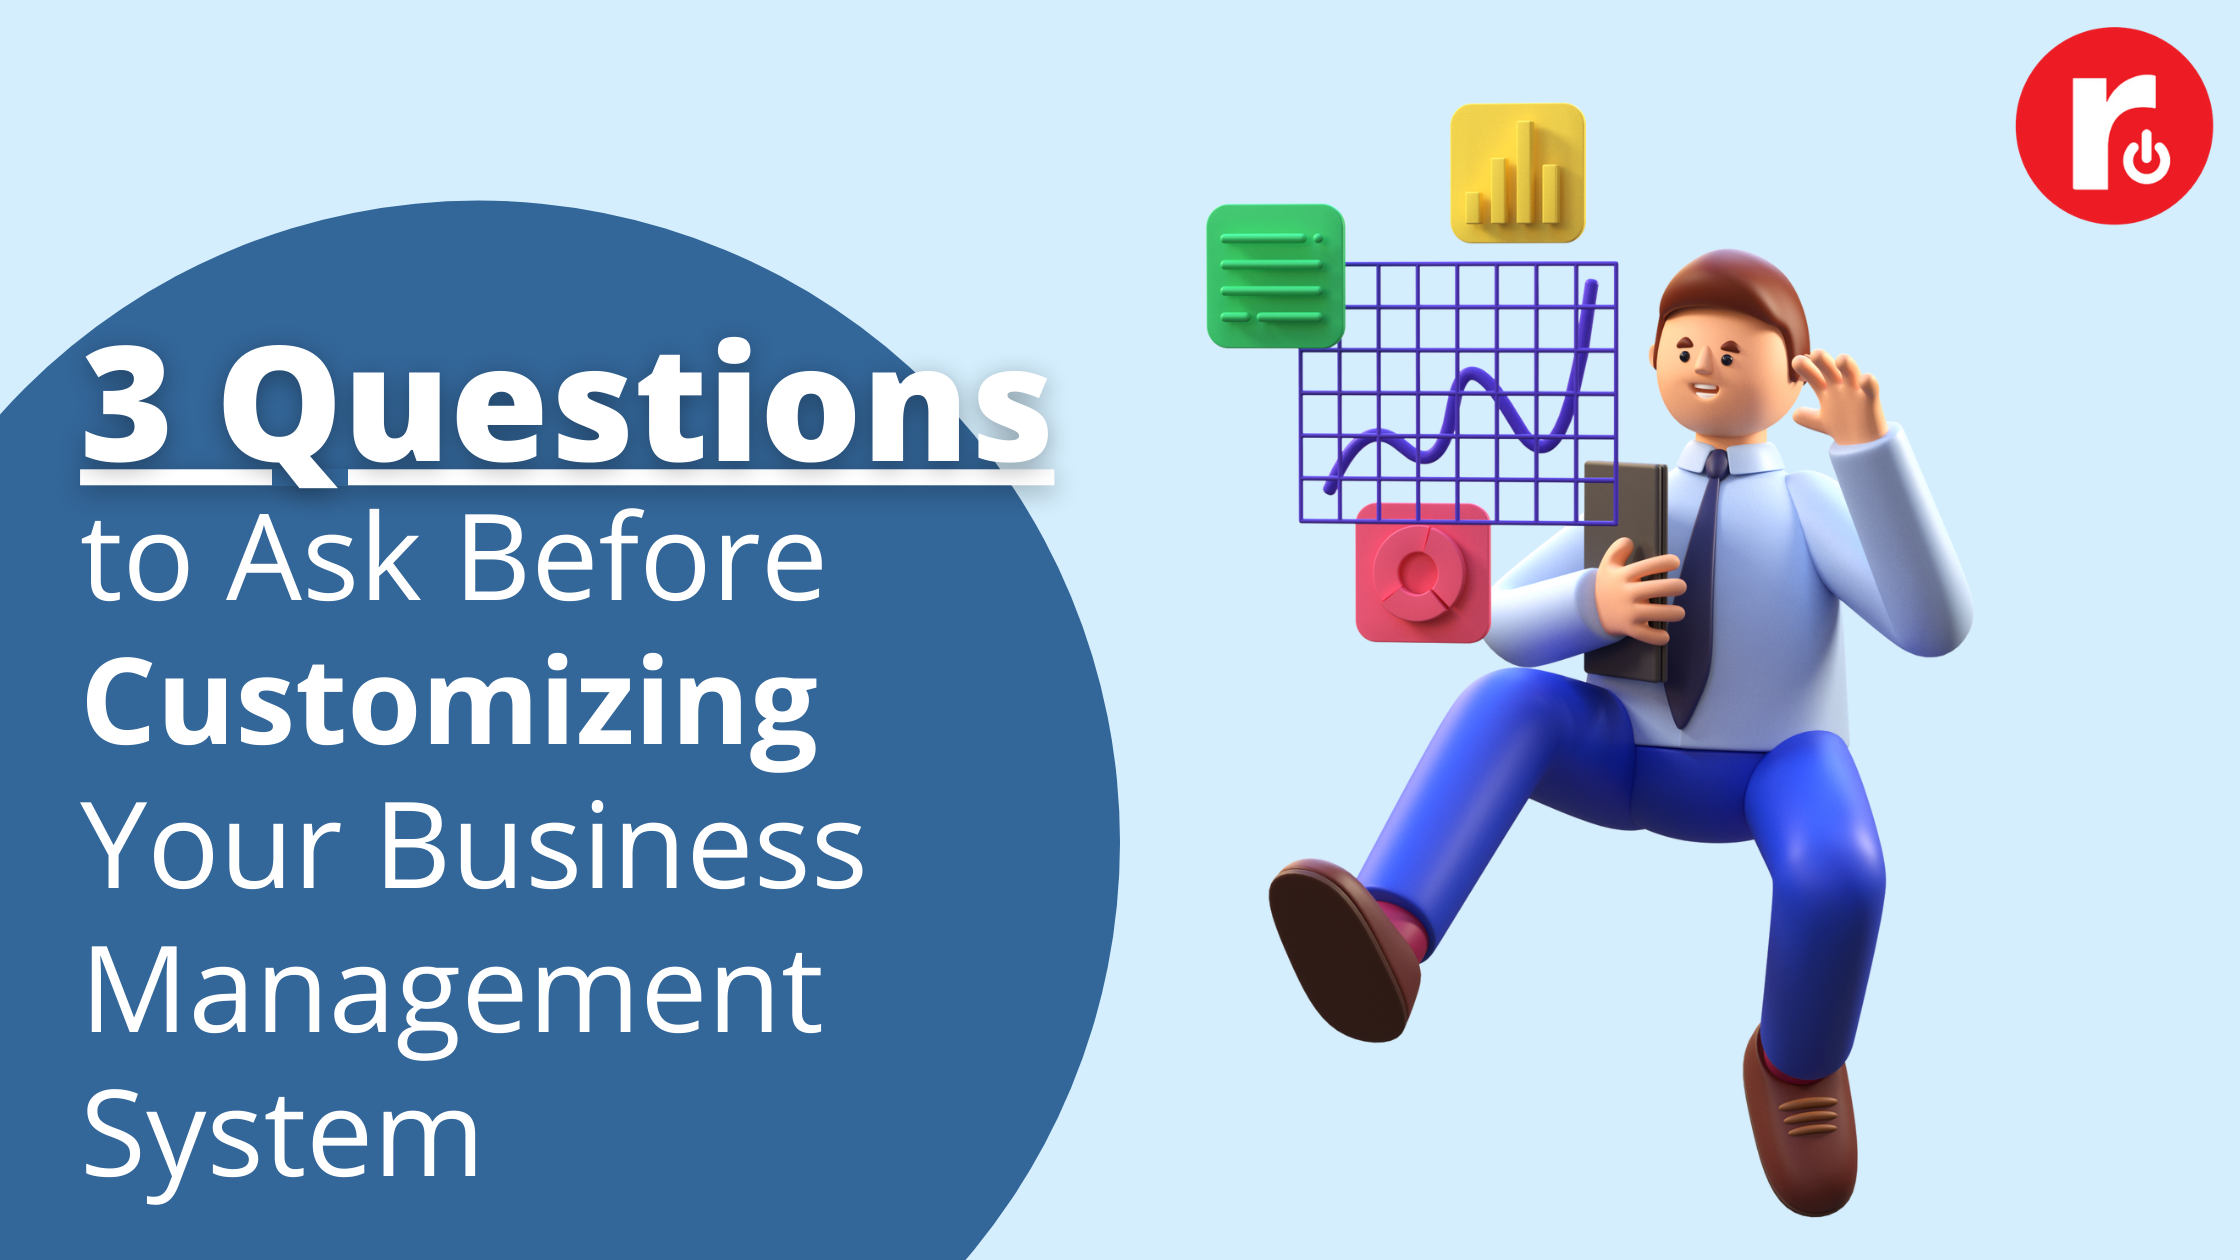 3 Questions to Ask Before Customizing Your Business Management System